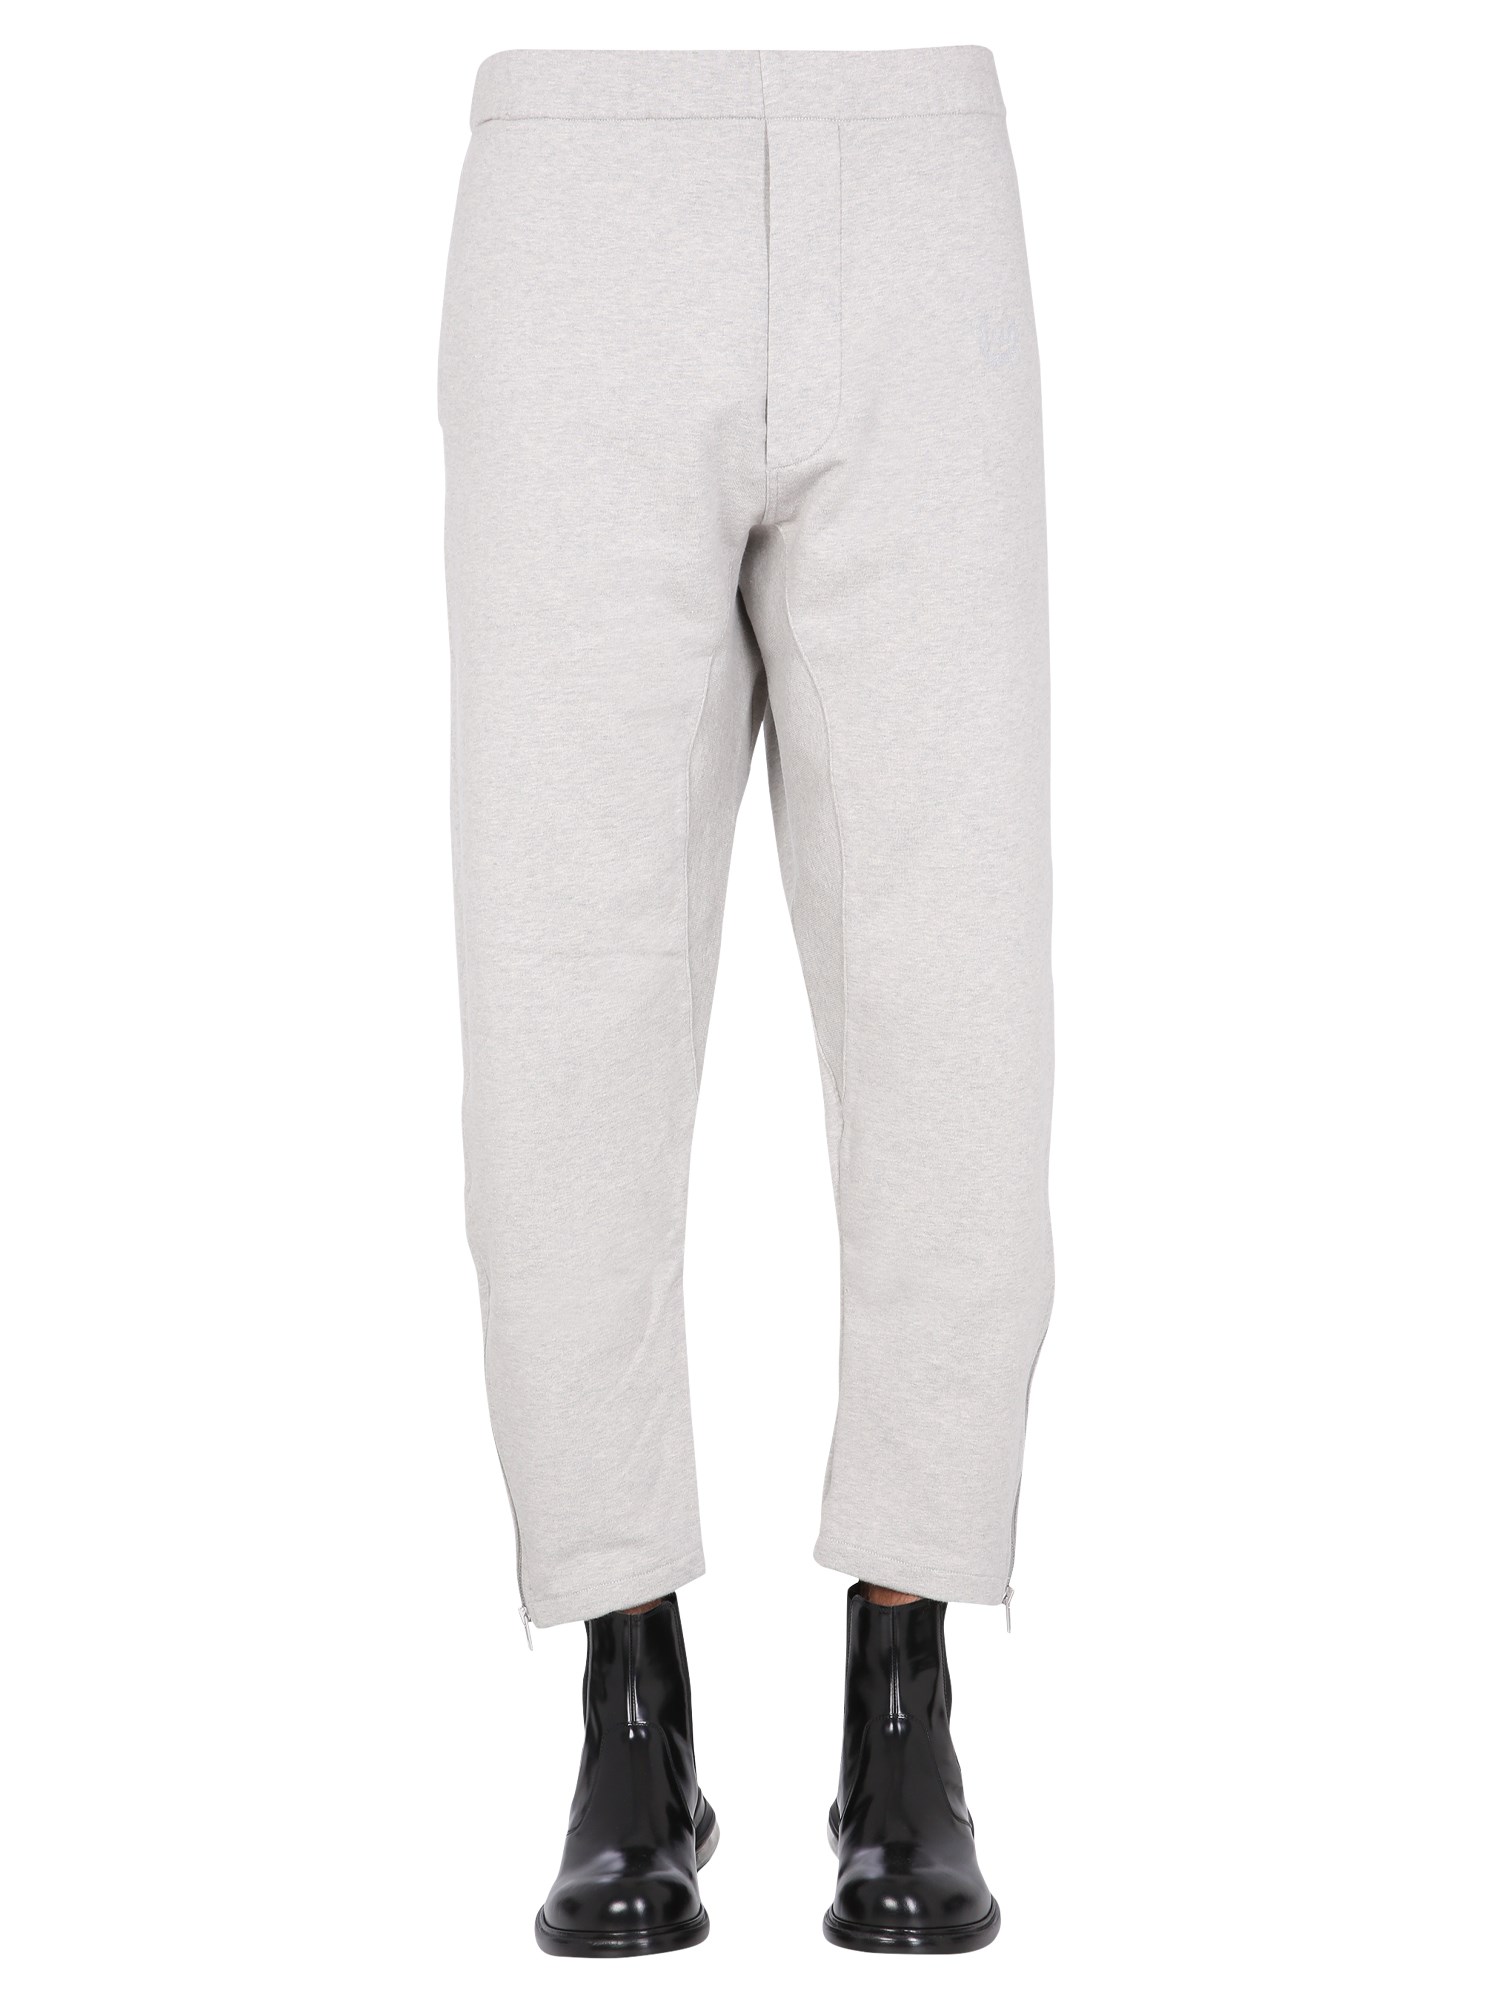 maison margiela jogging pants with embroidered logo